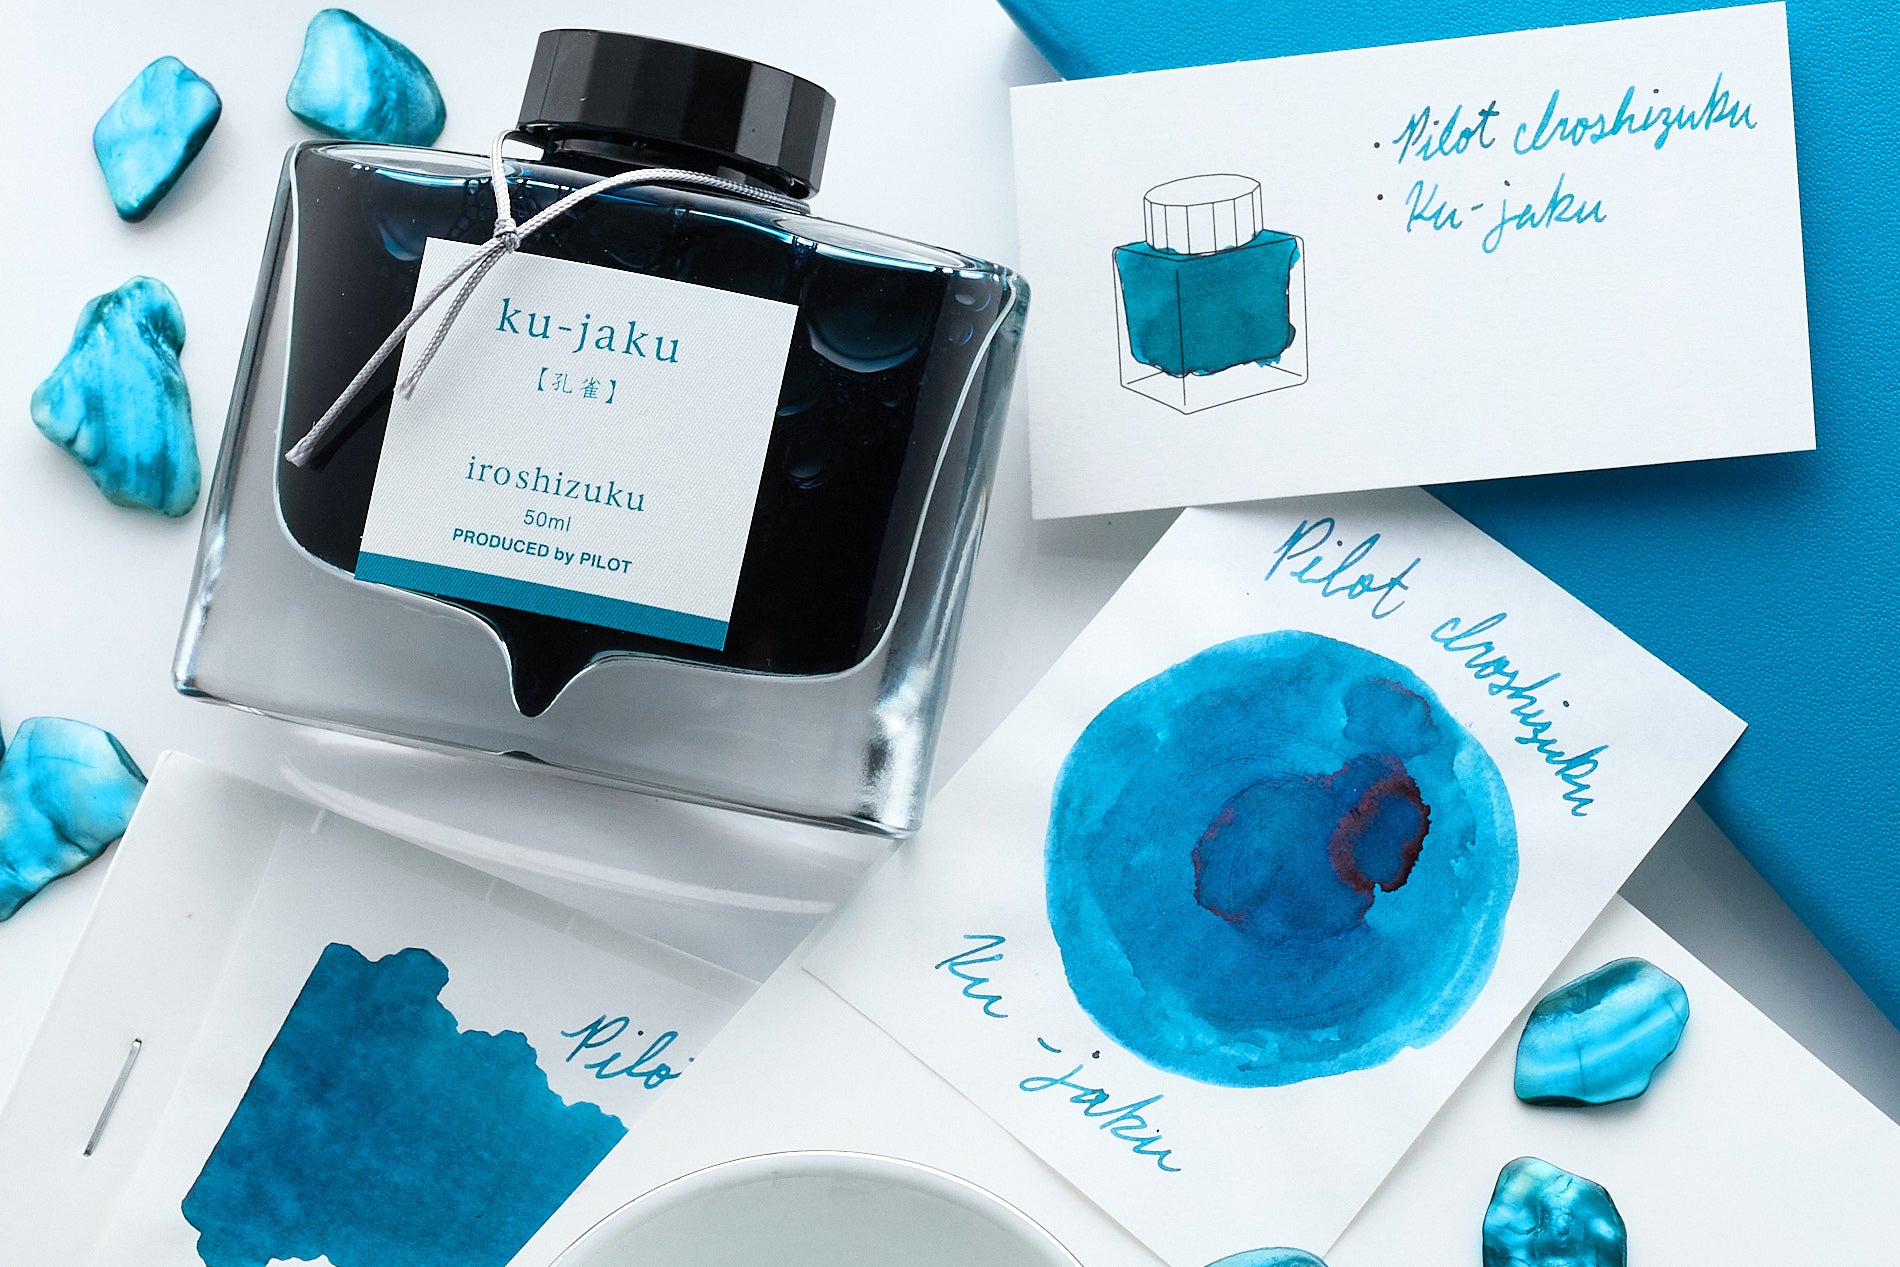 Pilot Iroshizuku Ku-Jaku Fountain Pen Ink writing sample and swaps with bottle on desk type background and bright blue bits of abalone shell as accents